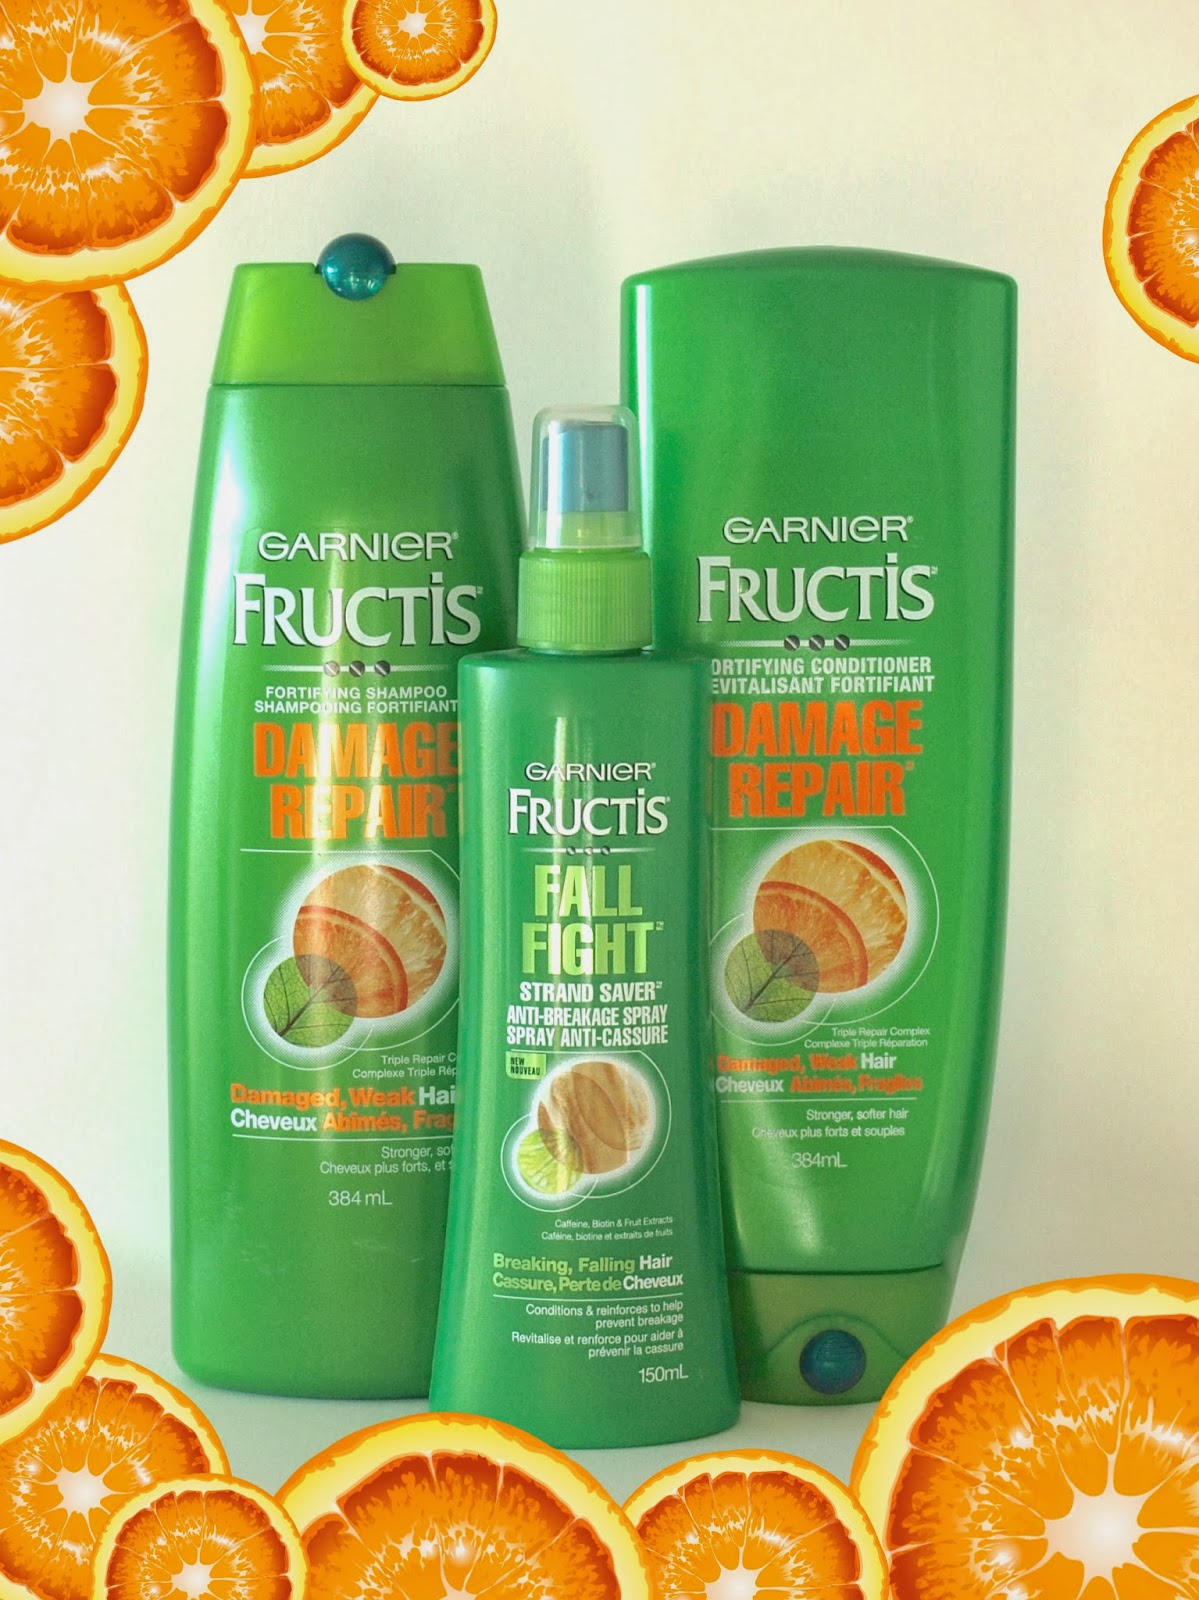 Verheugen slachtoffer Scarp Garnier Fructis Damage Repair Shampoo & Conditioner & Fall Fight Strand  Saver Anti-Breakage Spray: Review | The Happy Sloths: Beauty, Makeup, and  Skincare Blog with Reviews and Swatches